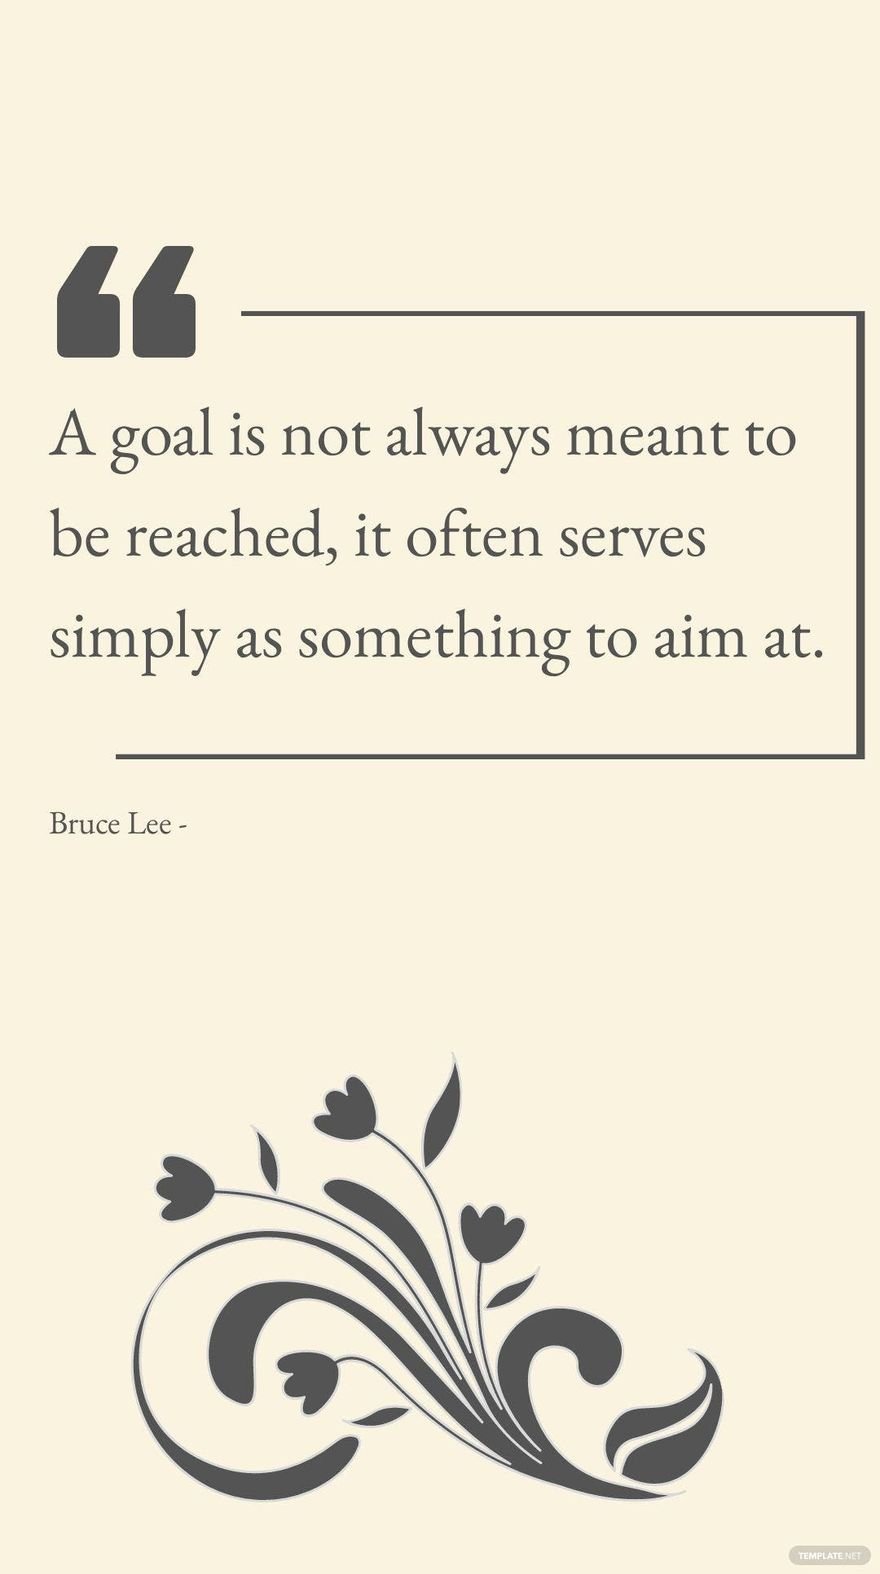 Bruce Lee - A goal is not always meant to be reached, it often serves simply as something to aim at.